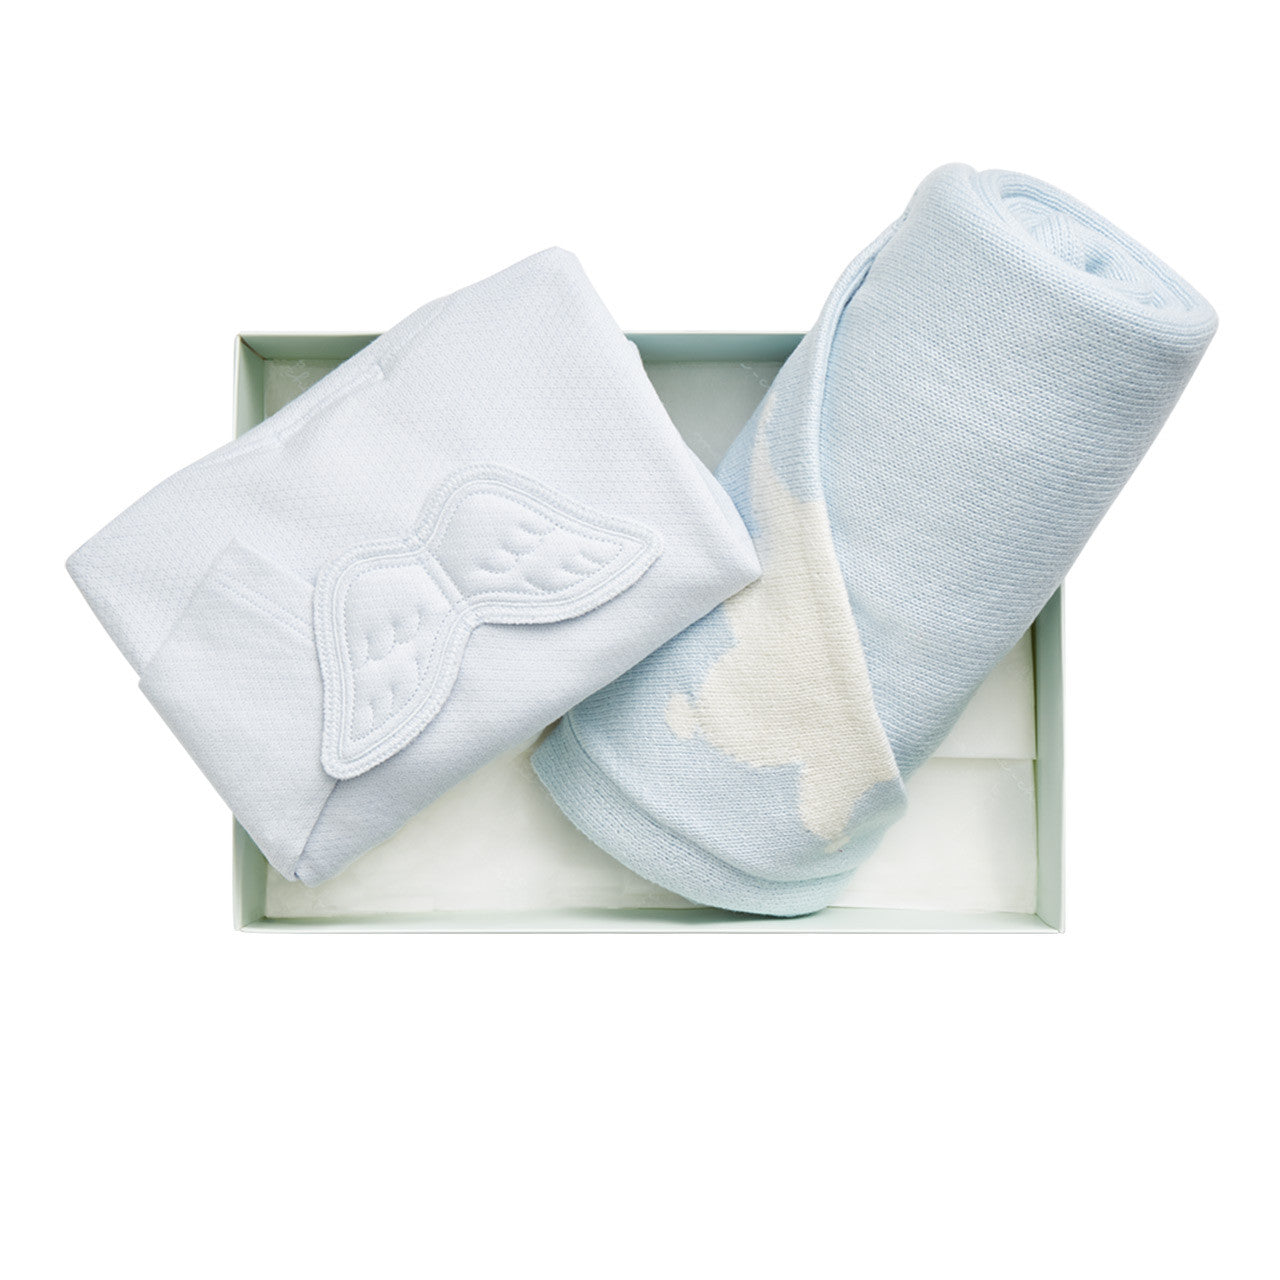 Marie-Chantal Baby Boy Wing And Crown Baby Gift Sets,  Luxury Baby Clothes, Marie-Chantal  Baby Blanket With Cashmere